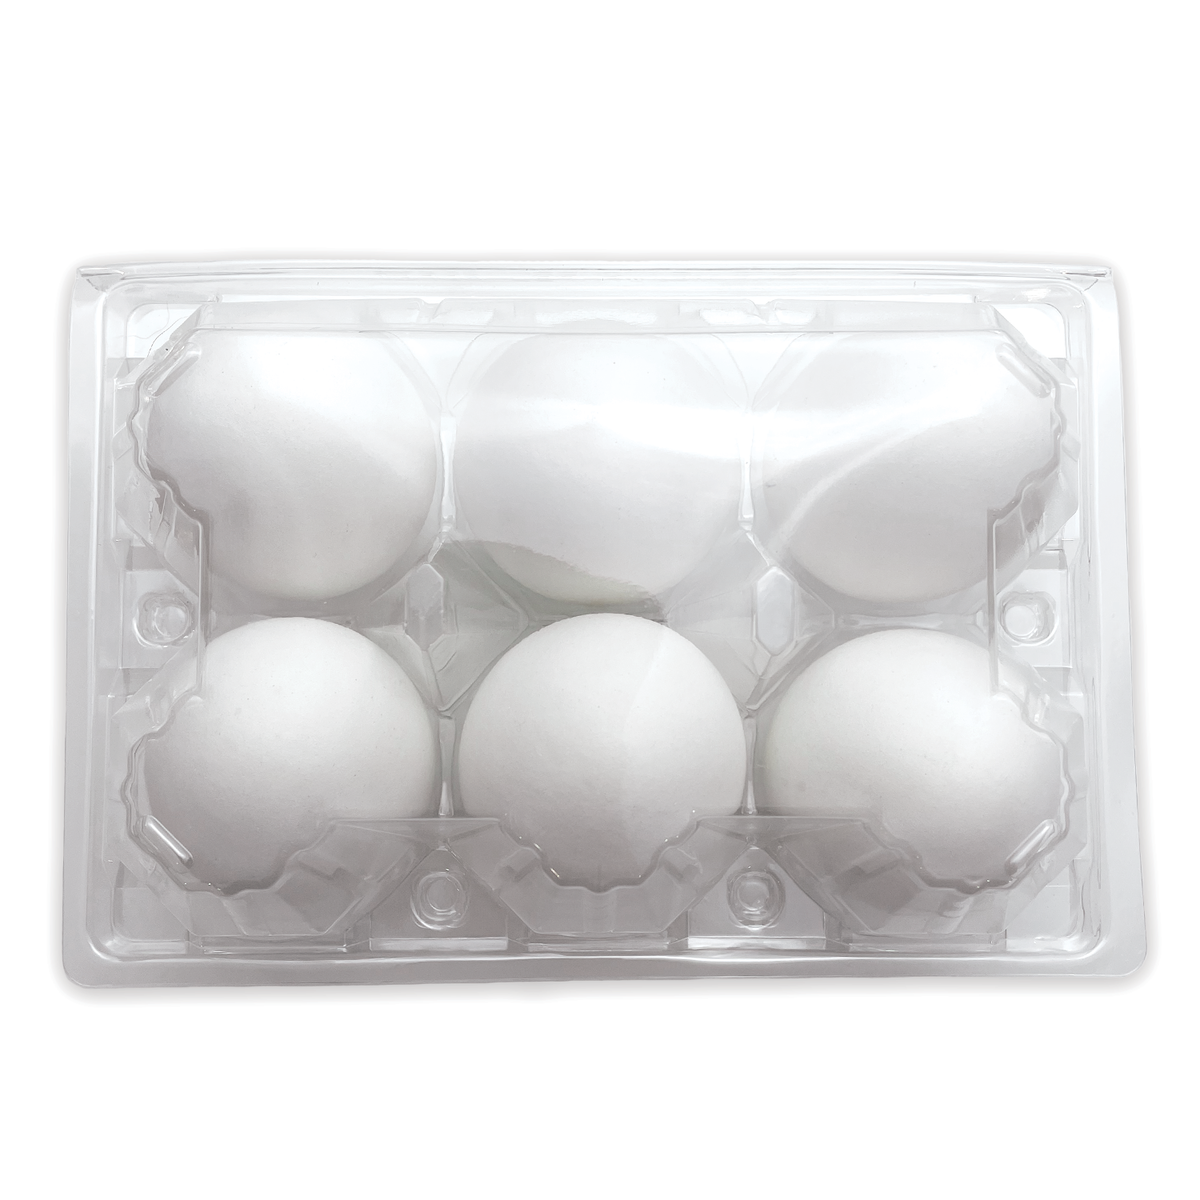 Cornucopia Duck Egg Cartons (8-Pack); Plastic Jumbo Egg Containers for Duck and Turkey Egg Storage